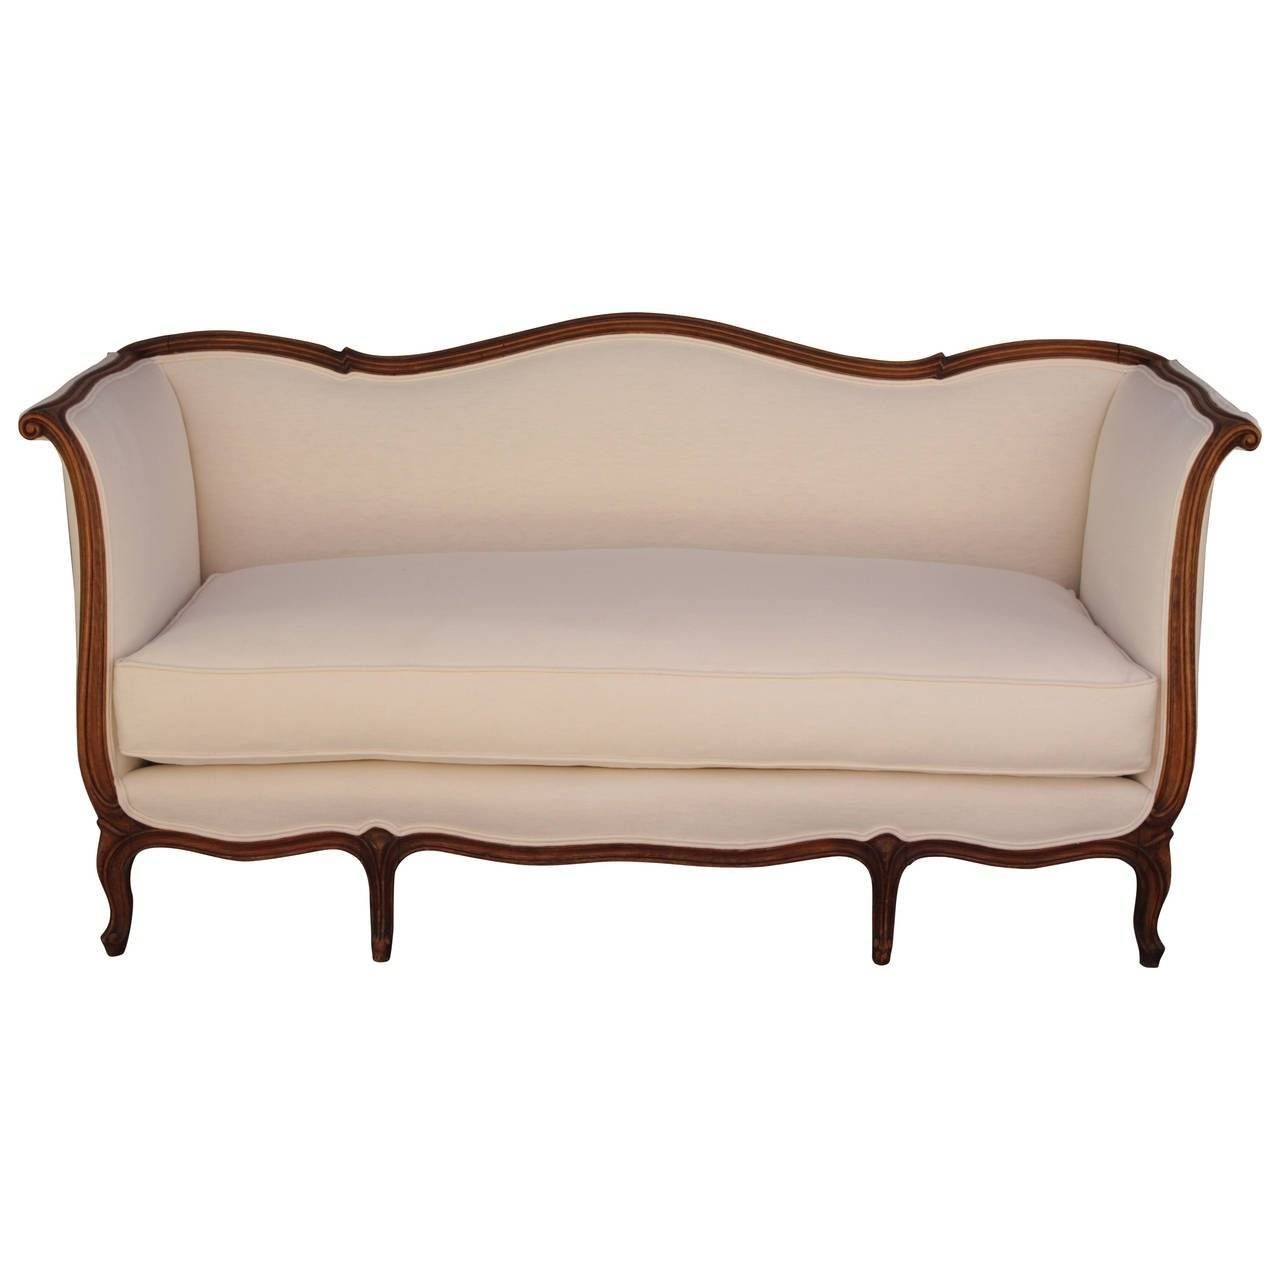 French Louis Xv Style Sofa With Linen Upholstery At 1stdibs Within French Style Sofas (View 3 of 25)